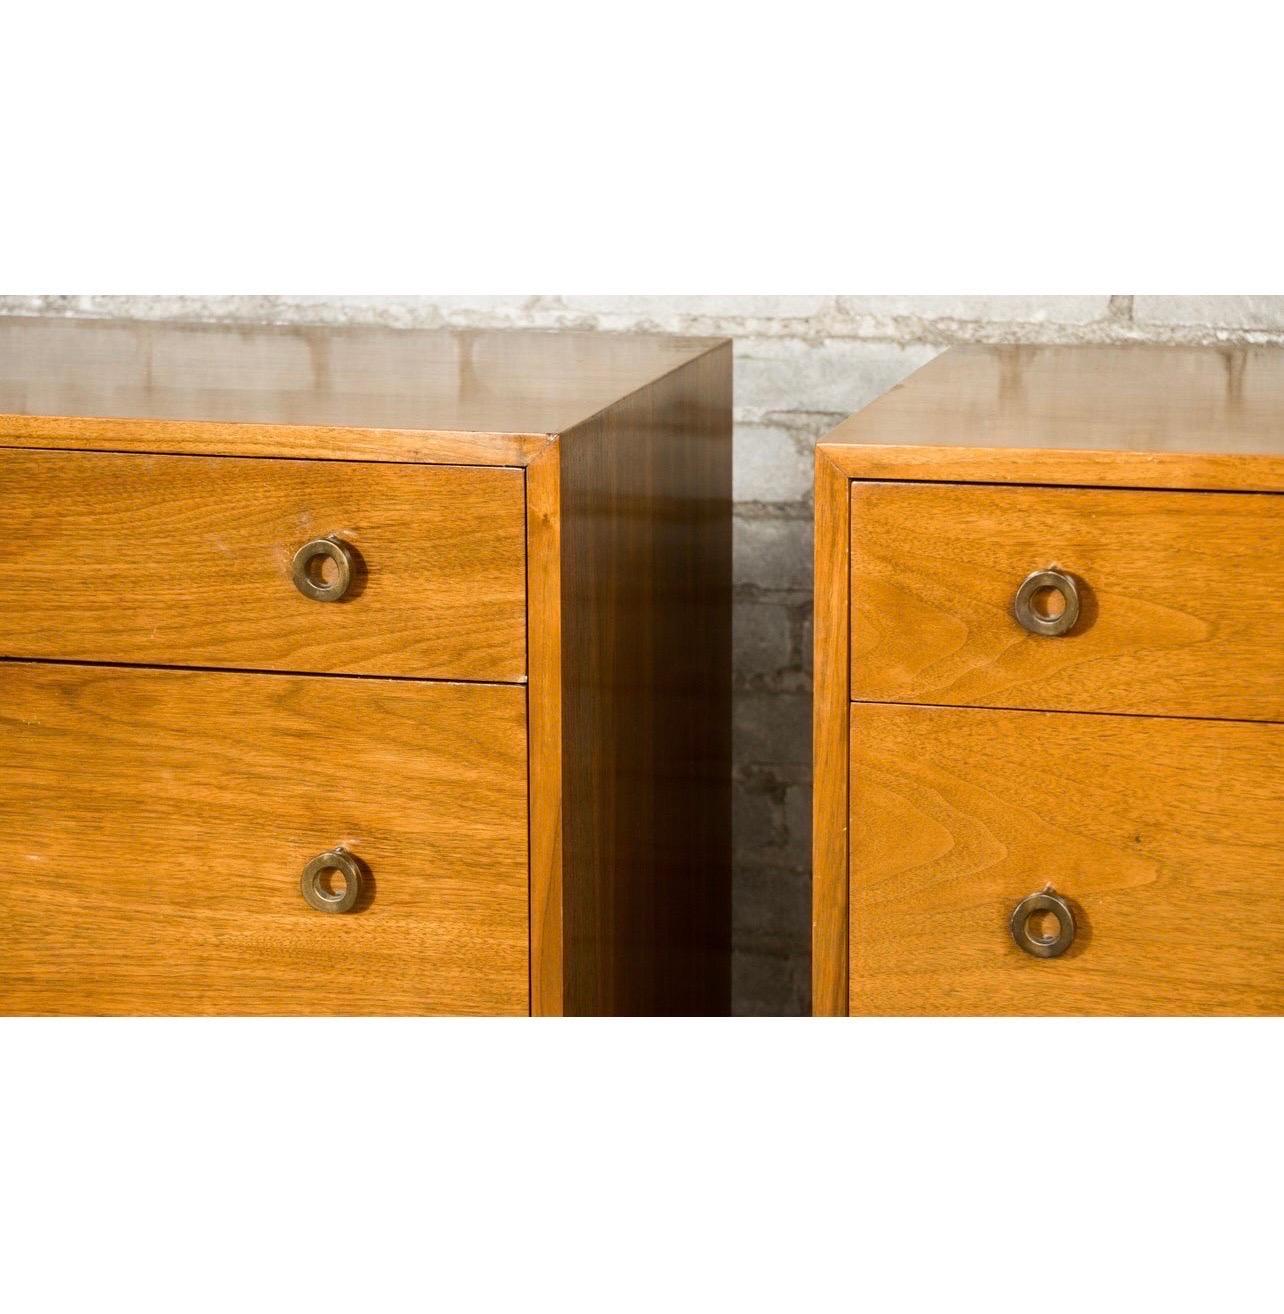 Gorgeous pair of lowboy dressers designed by Greta Grossman for Glenn of California, circa 1950's. Elegant walnut wood grain contrasts perfectly with signature Grossman round brass pulls. Each dresser features 3 drawers with divider in bottom